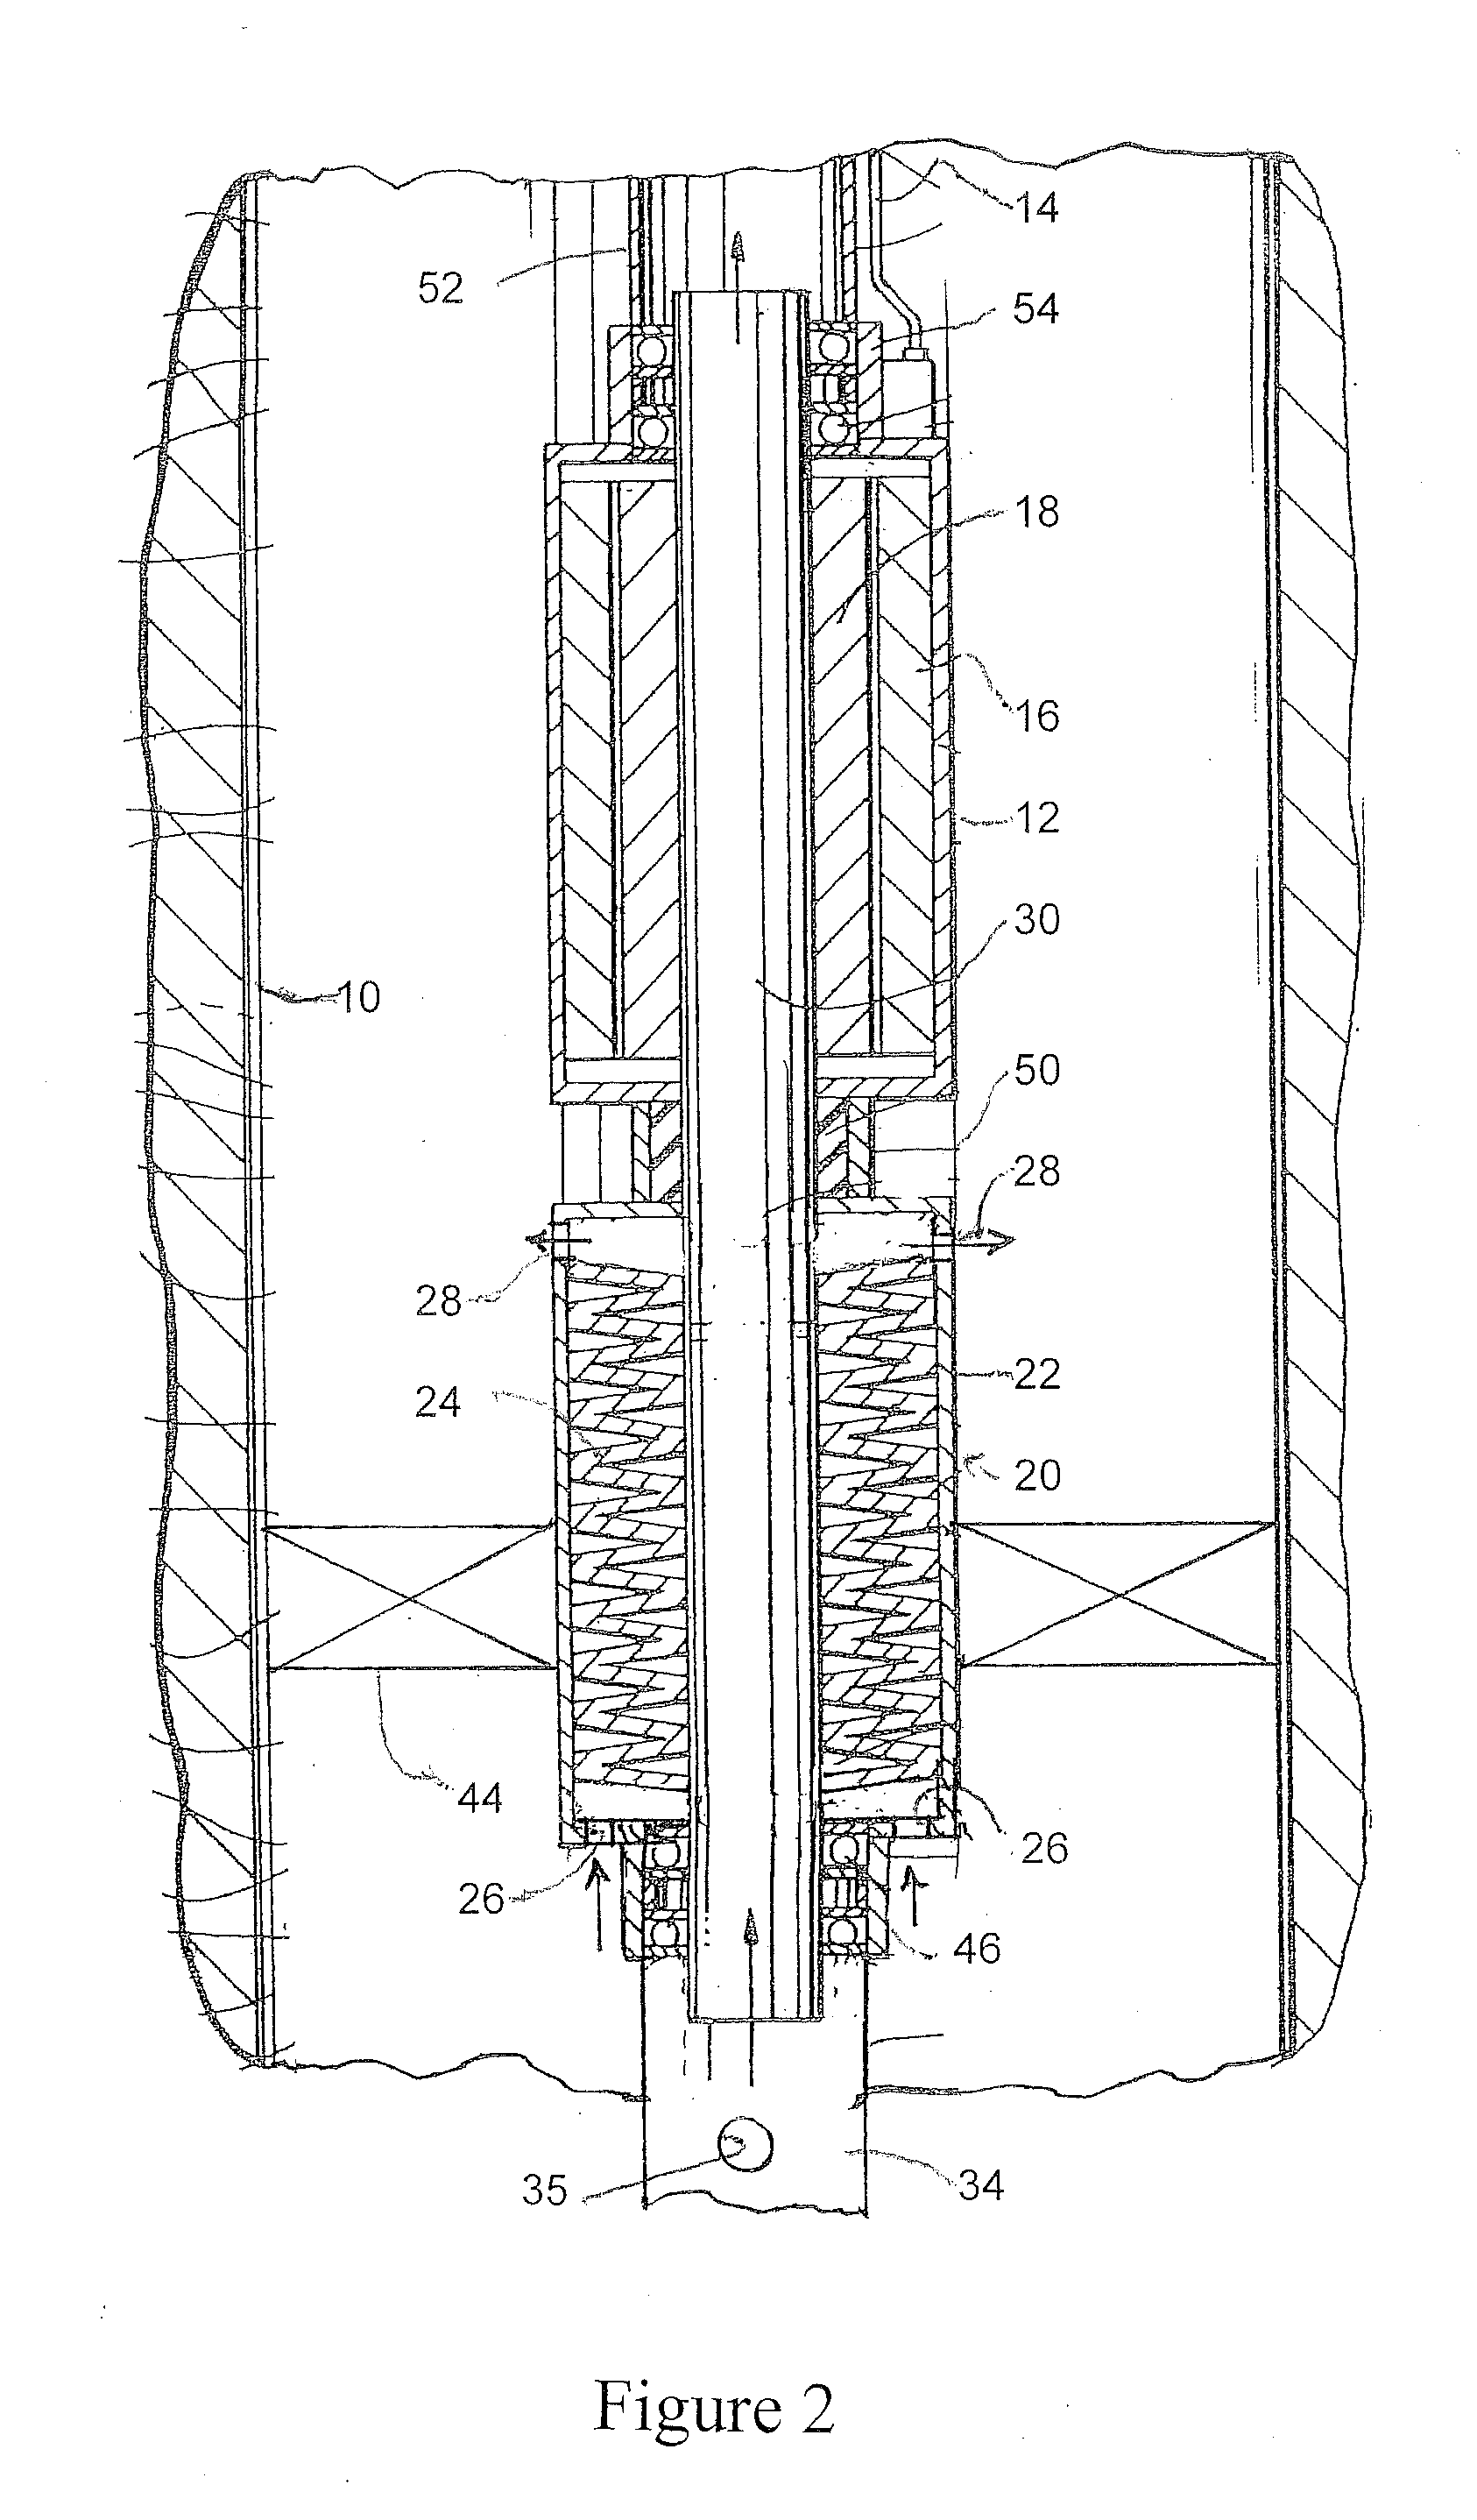 Electrical submersible pump assembly for separating gas and oil